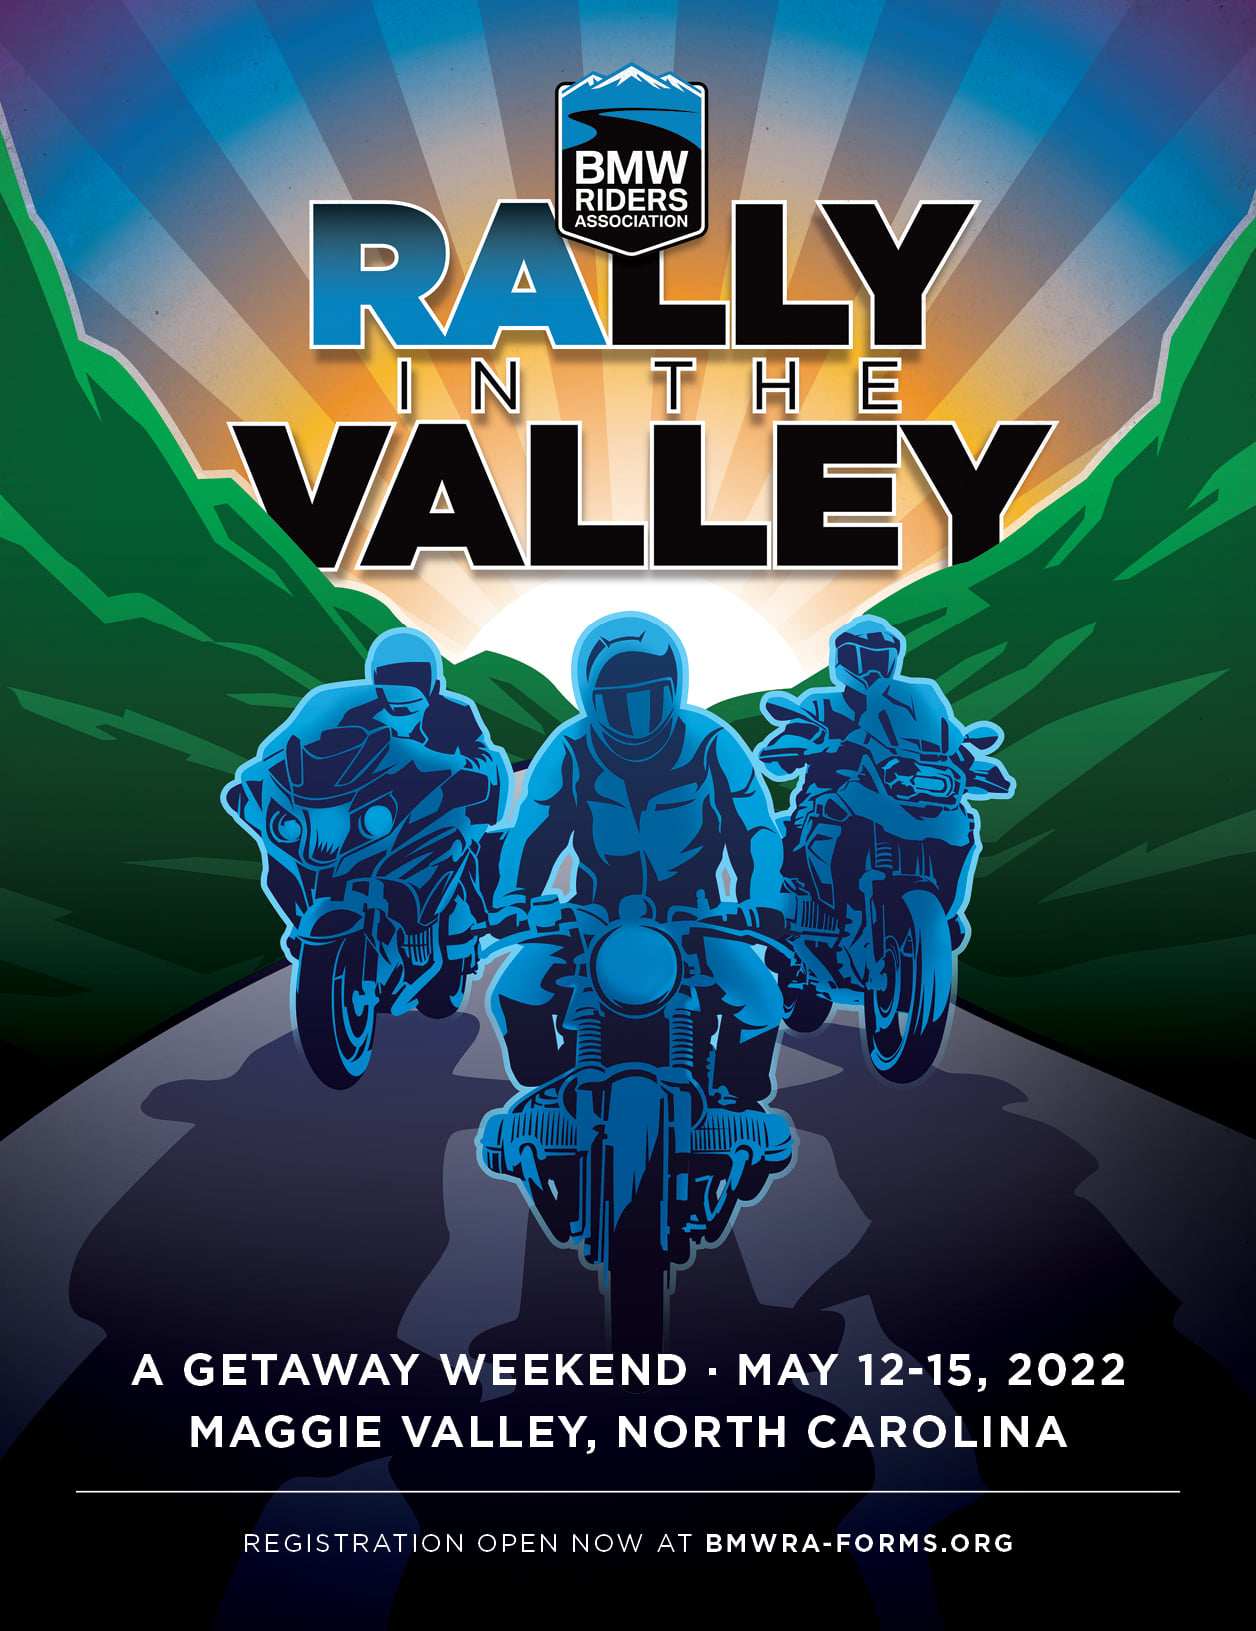 Rally in the Valley BMW Riders Association